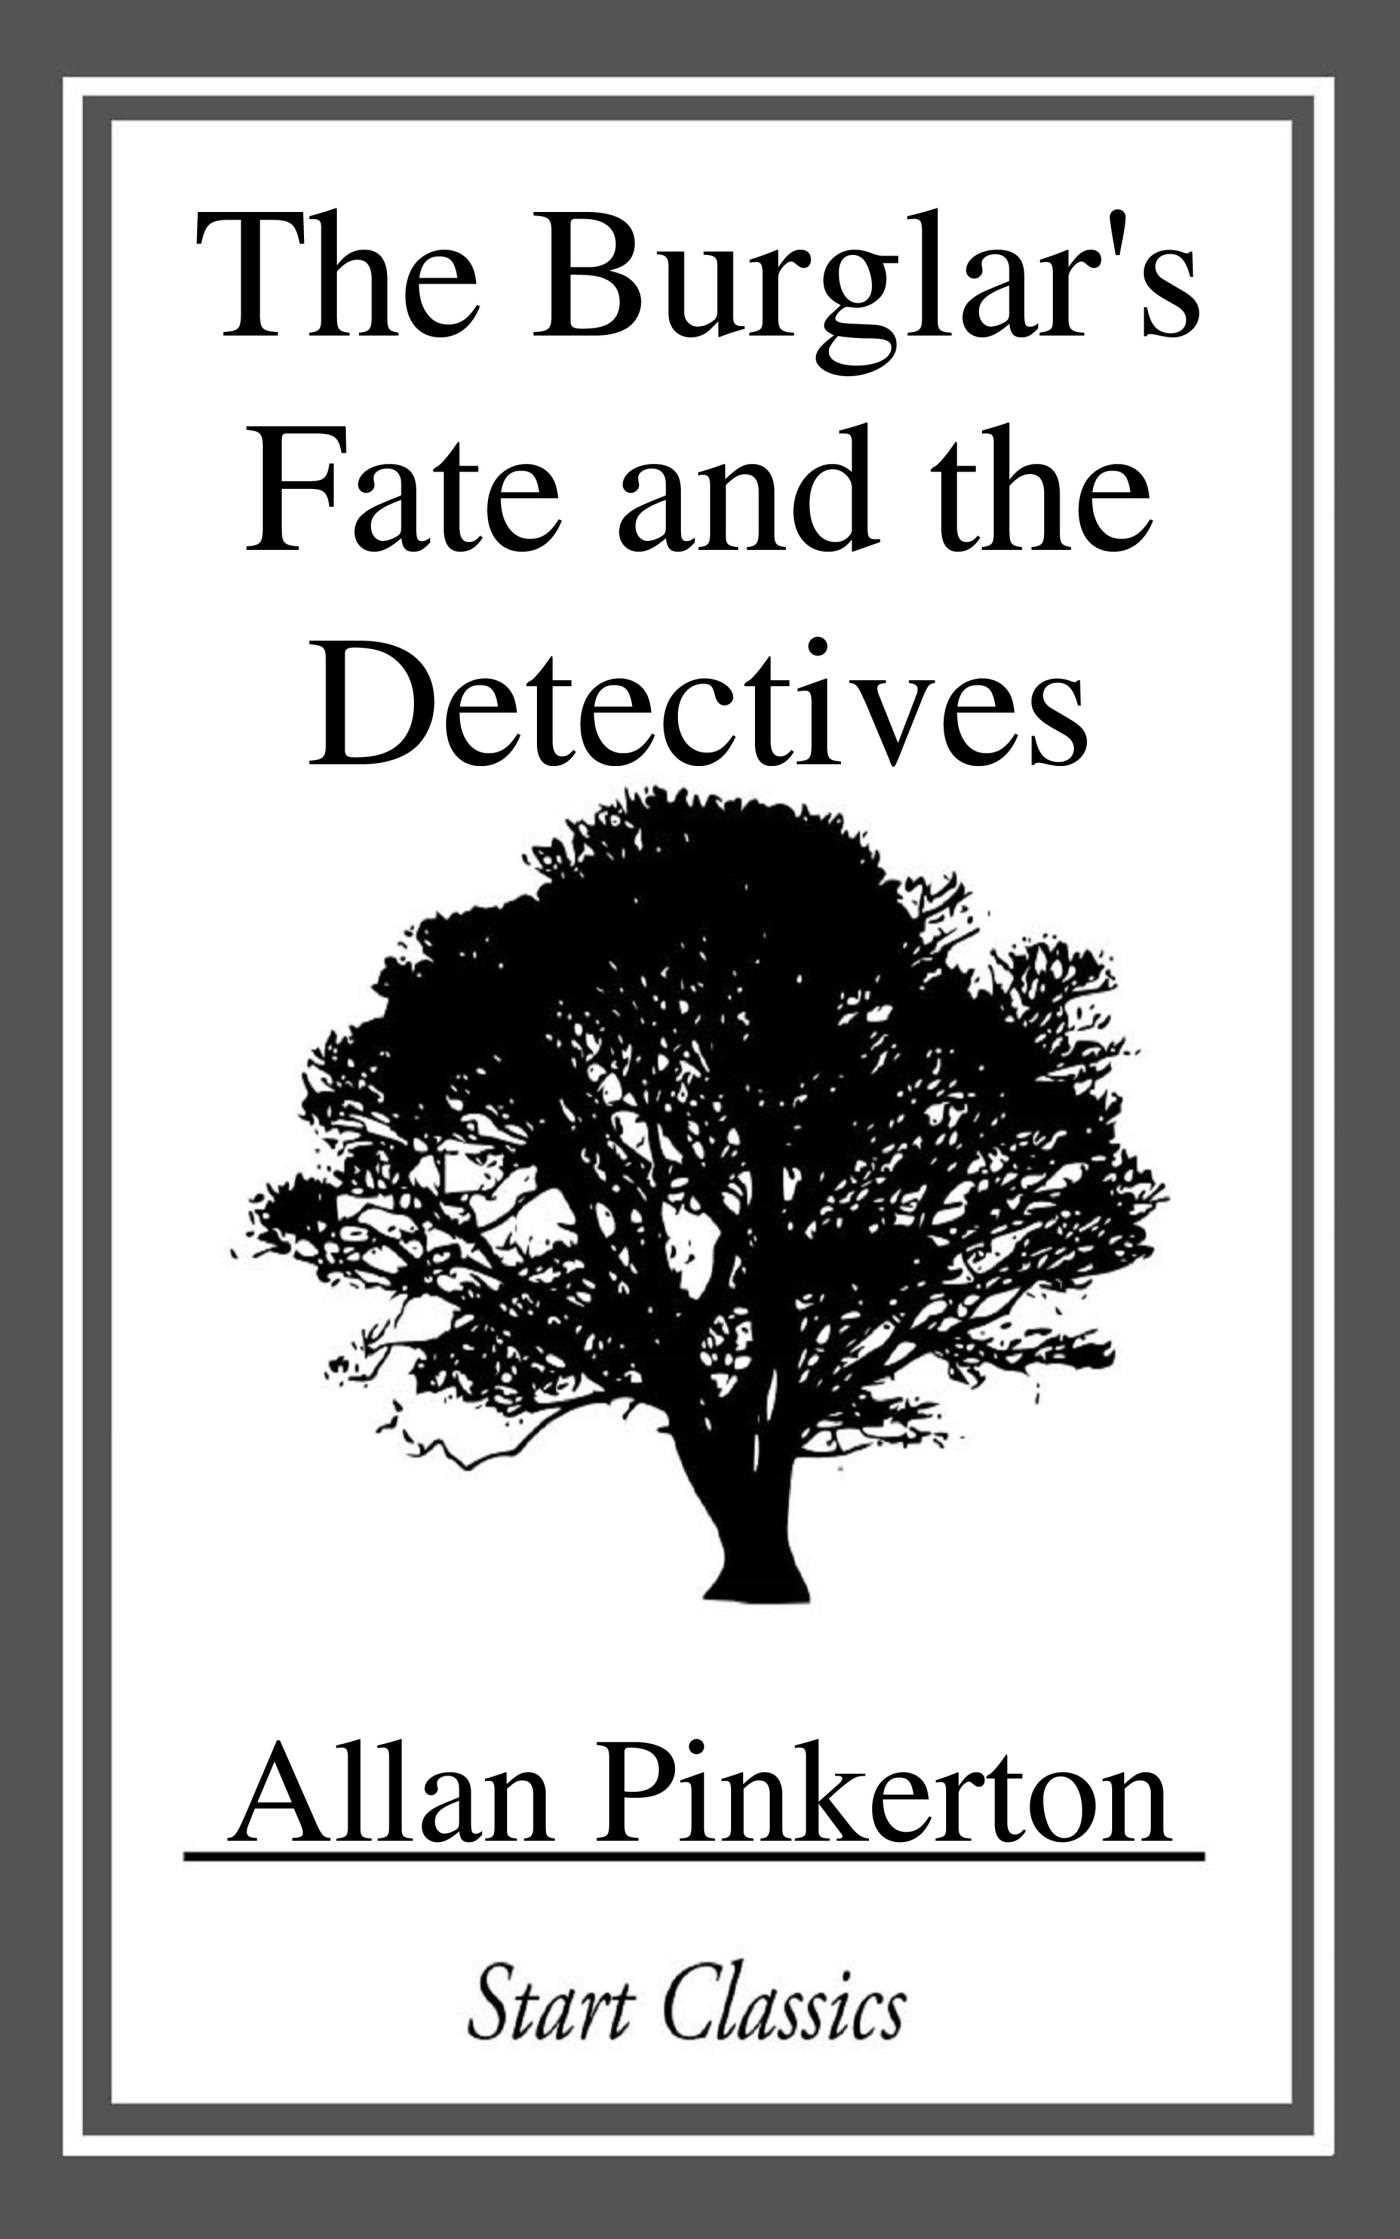 The Burglar's Fate and the Detectives - Allan Pinkerton